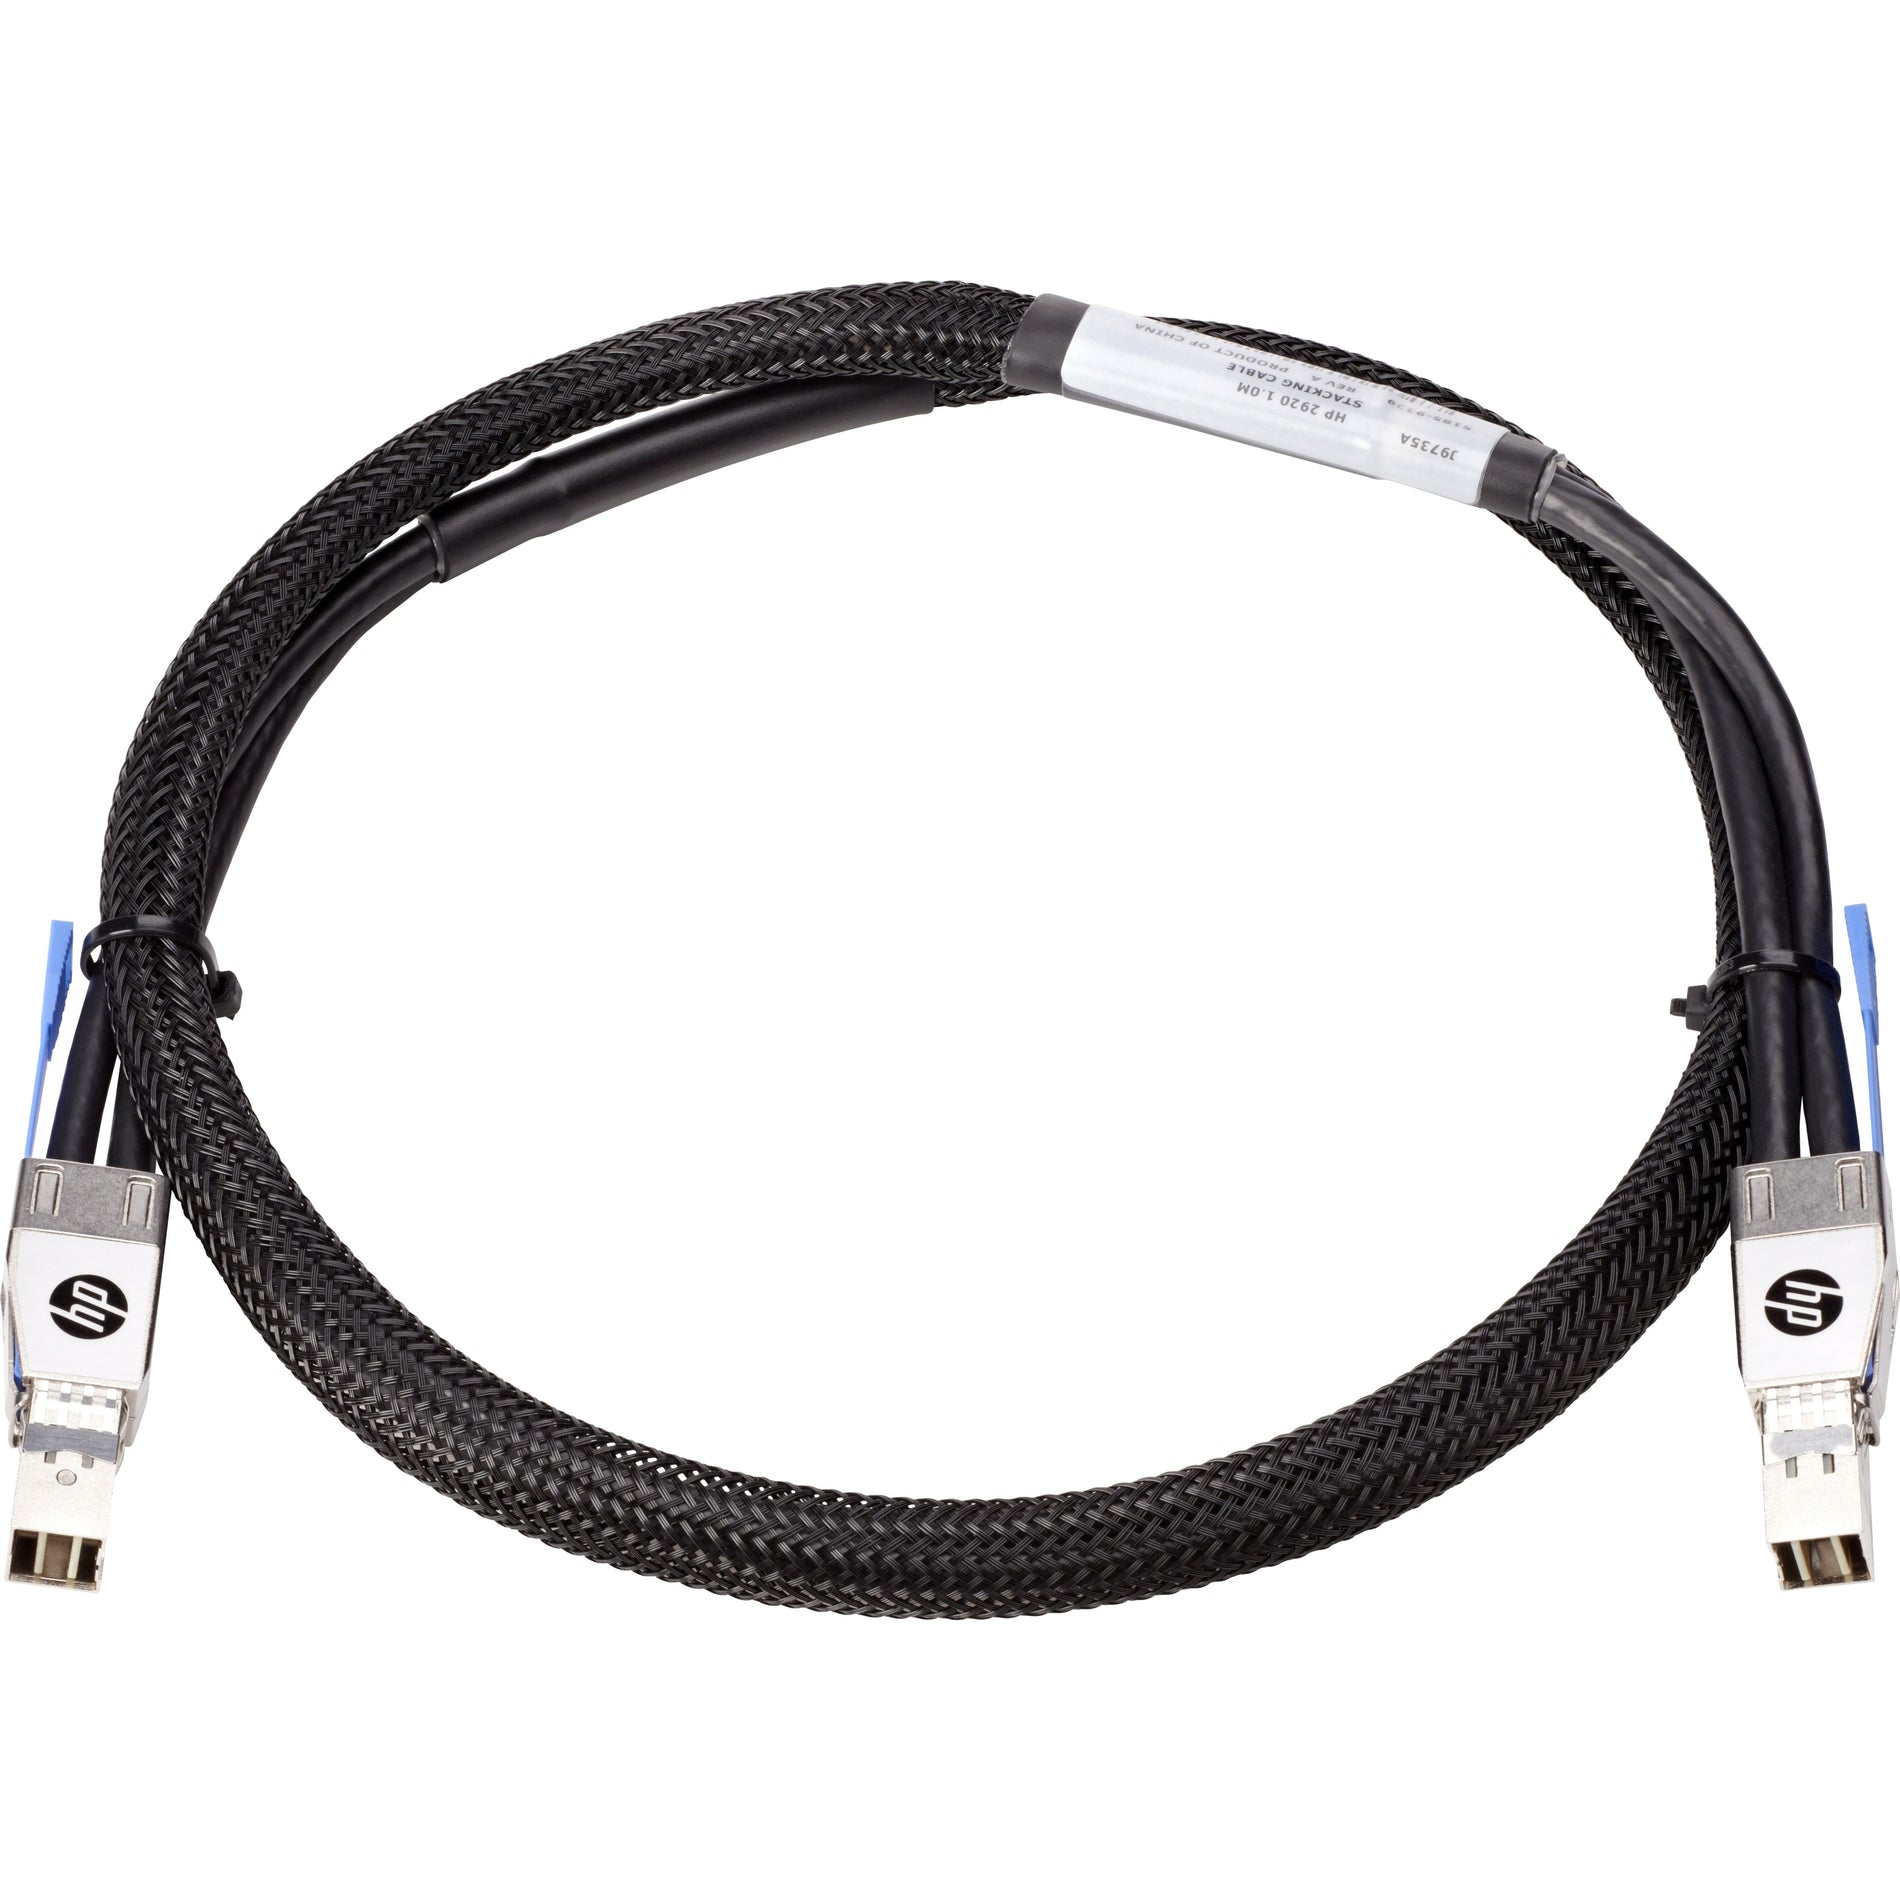 HPE J9735A 2920 1m Stacking Cable, High-Quality Network Cable for Easy Stacking